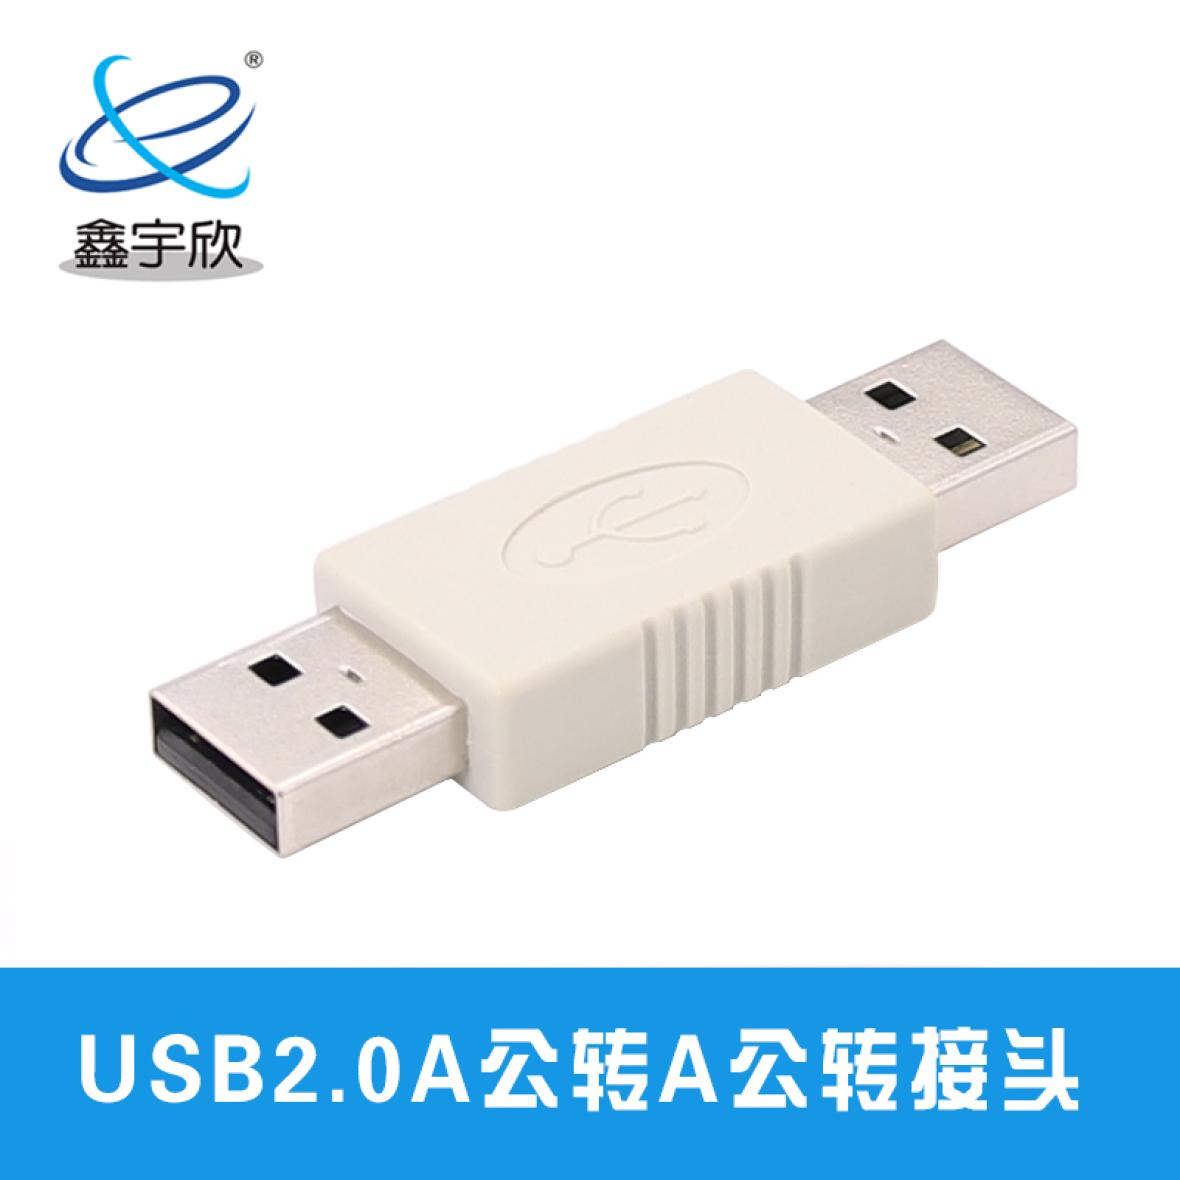  USB2.0A male to A male adapter